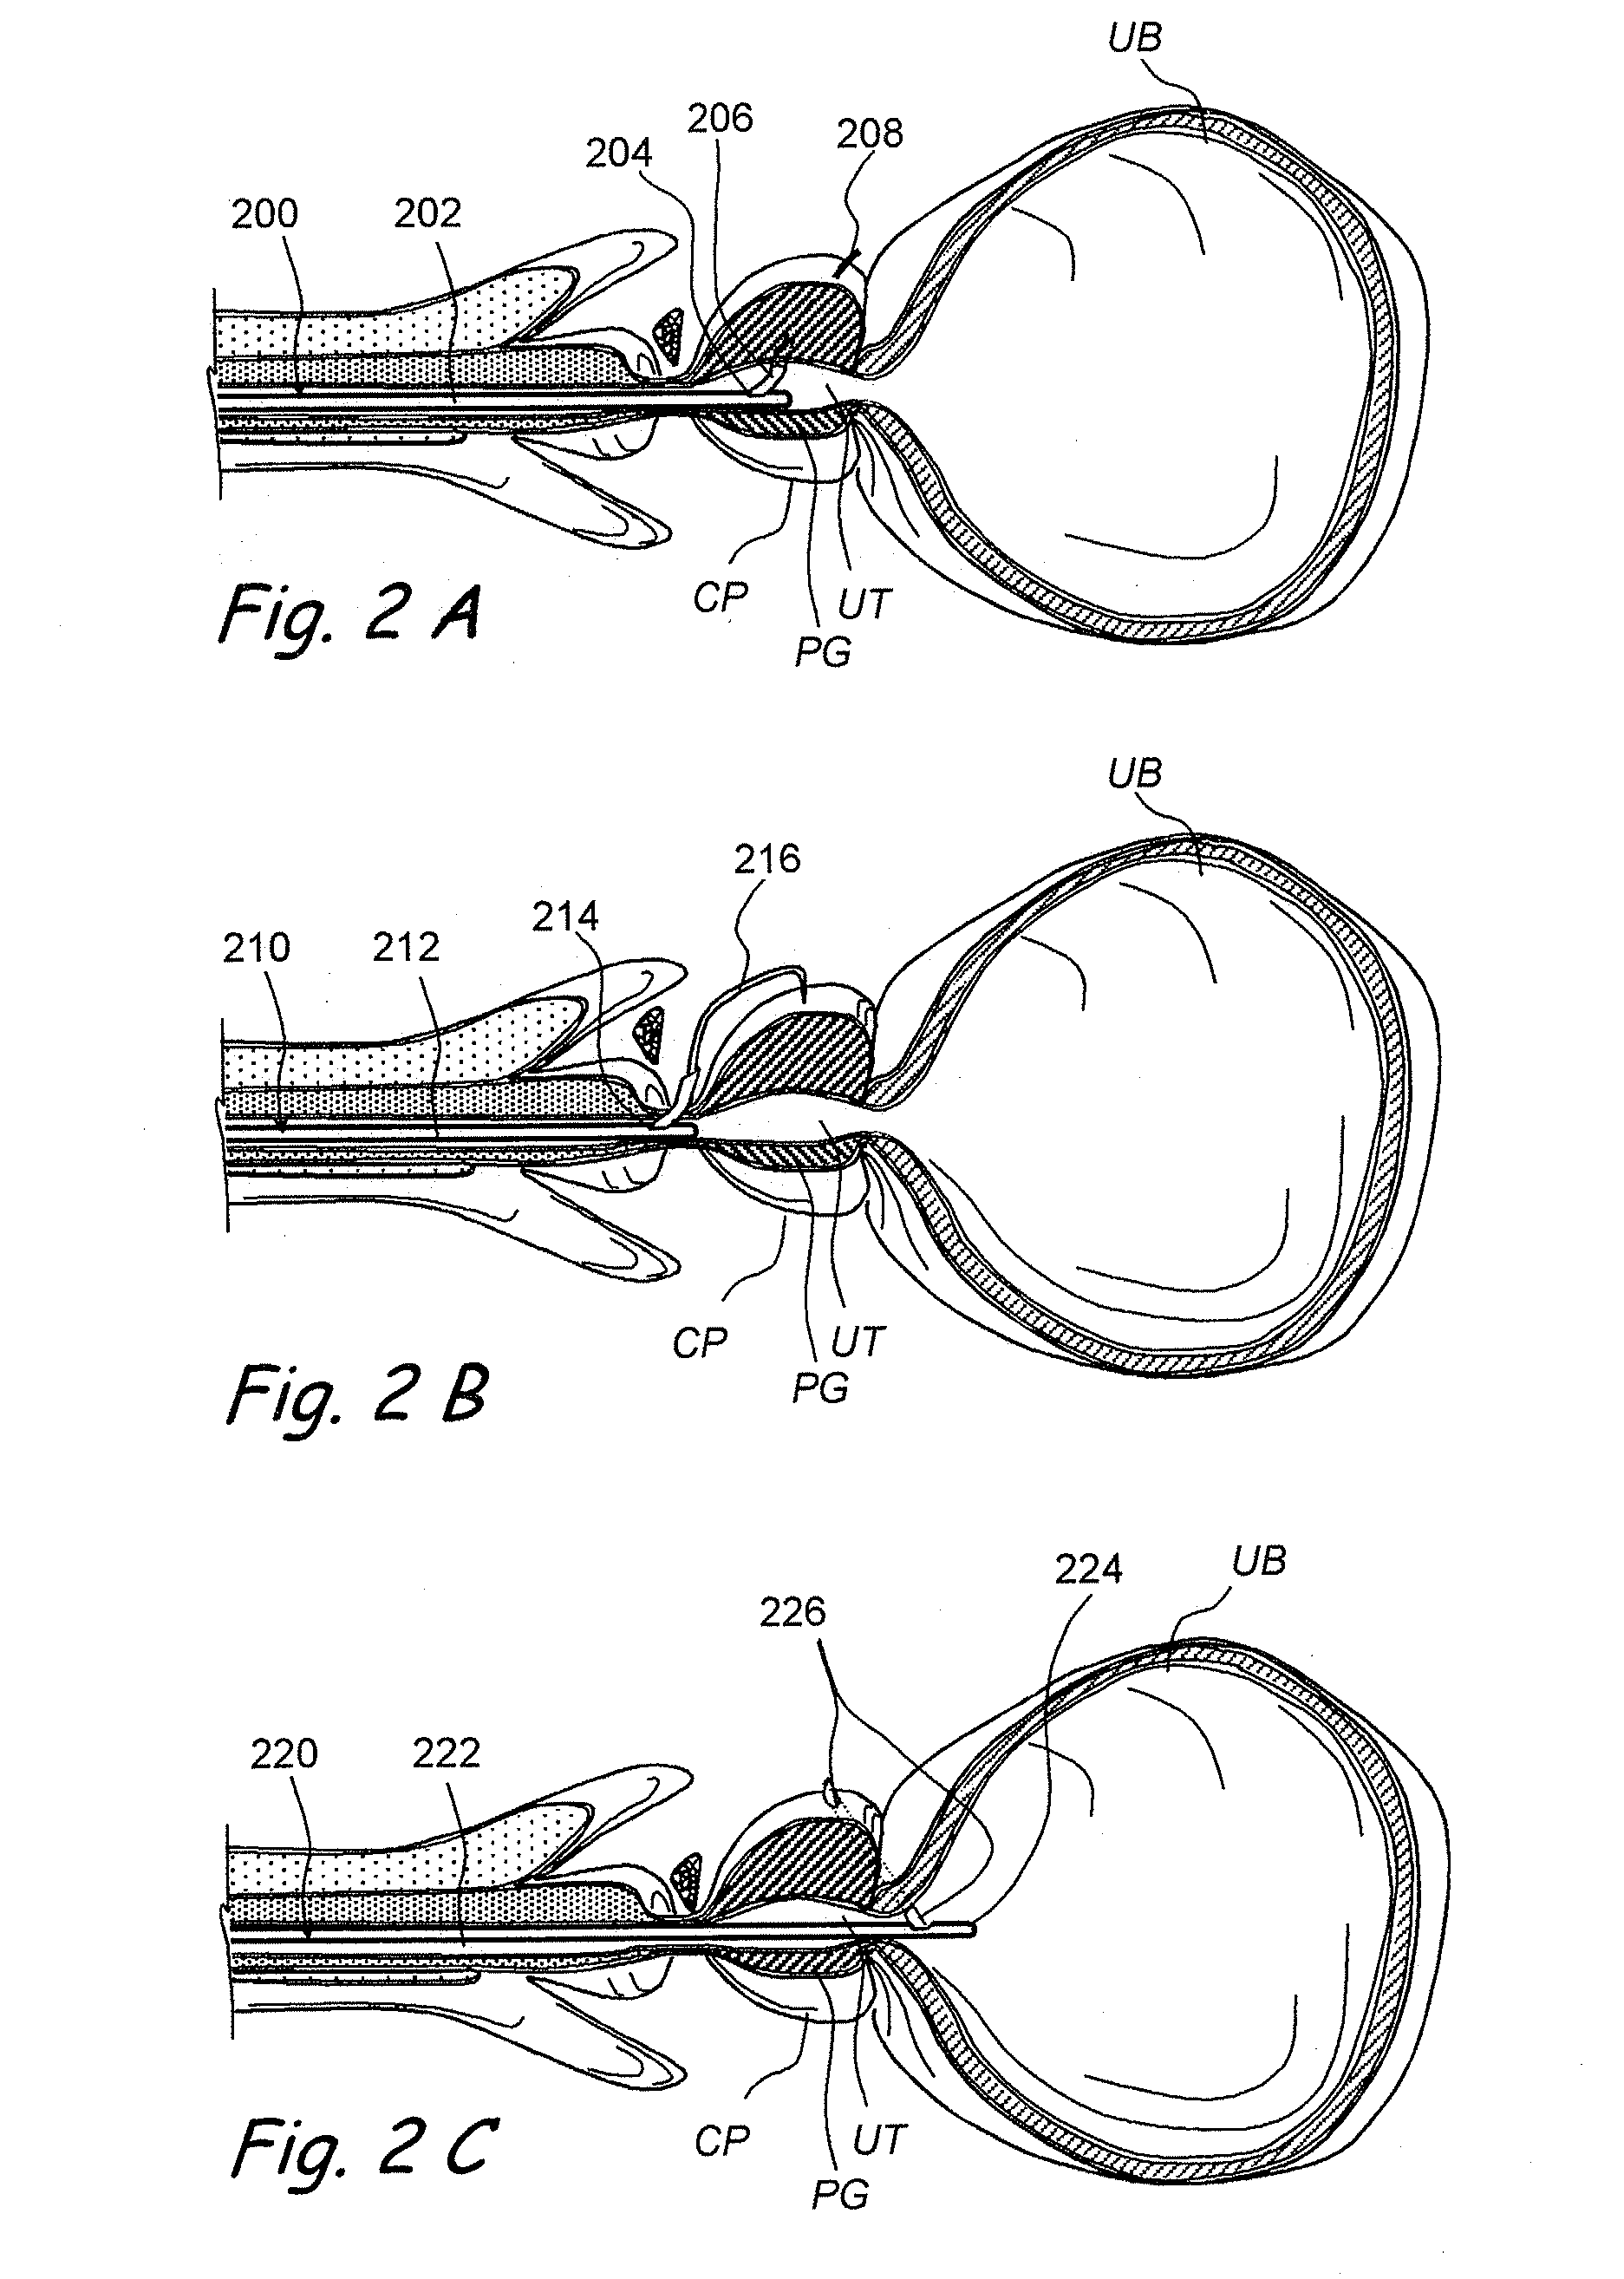 Devices, systems and methods for treating benign prostatic hyperplasia and other conditions